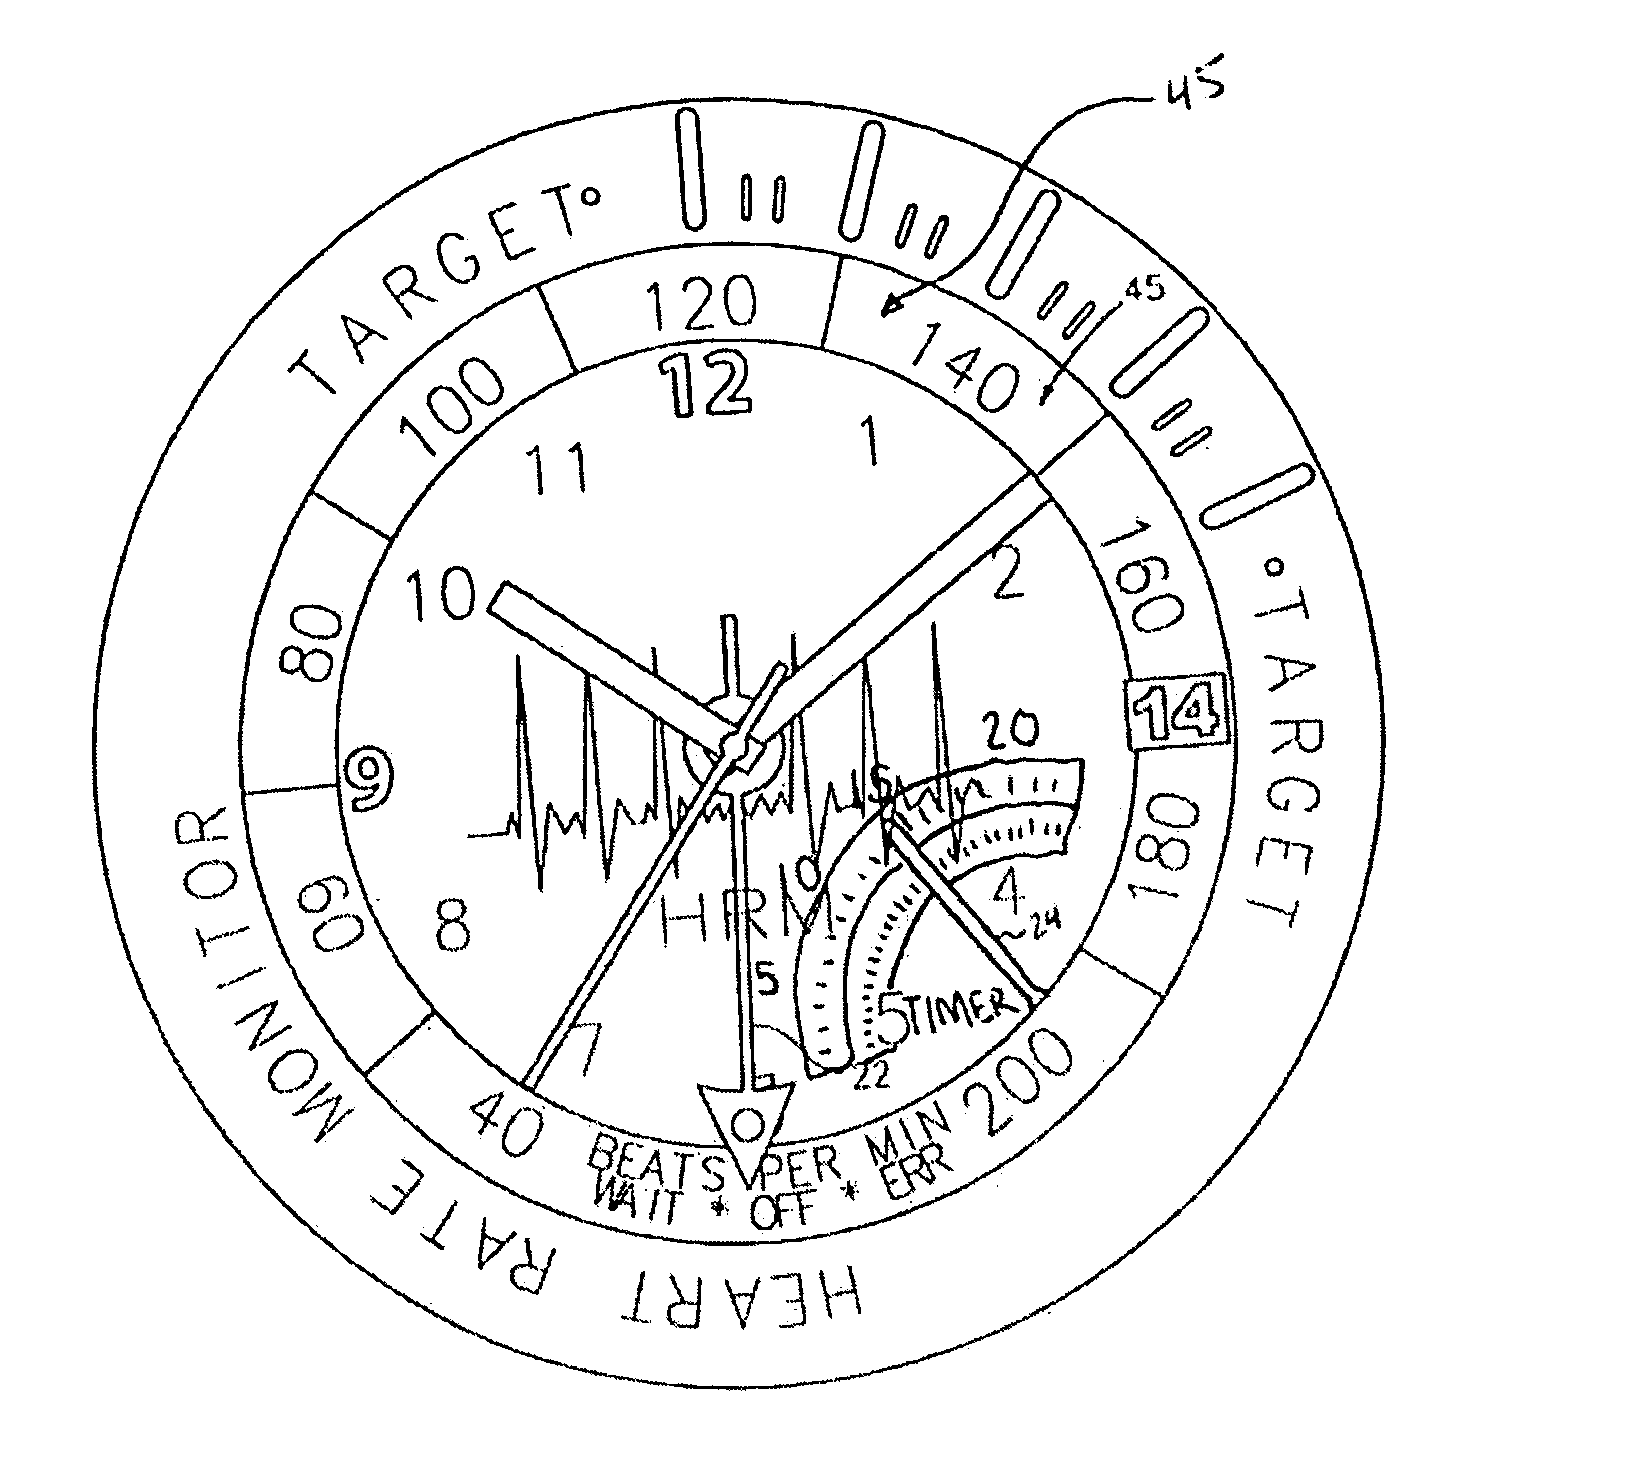 Wearable electronic device with mode operation indicator